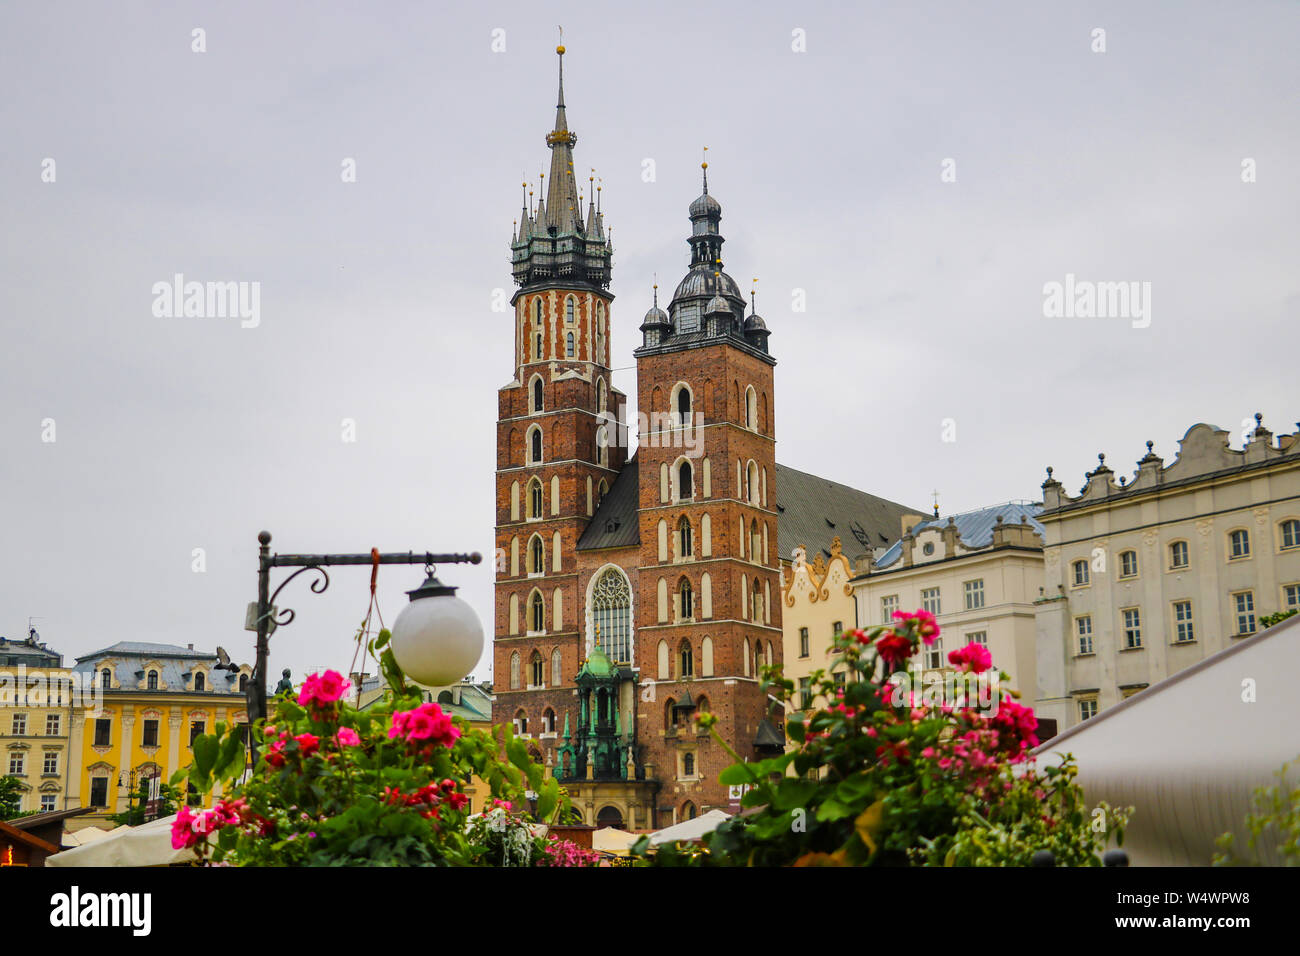 Krakow, Poland - May 21, 2019: View of flowers in the foreground, in the background the church is out of focus Stock Photo